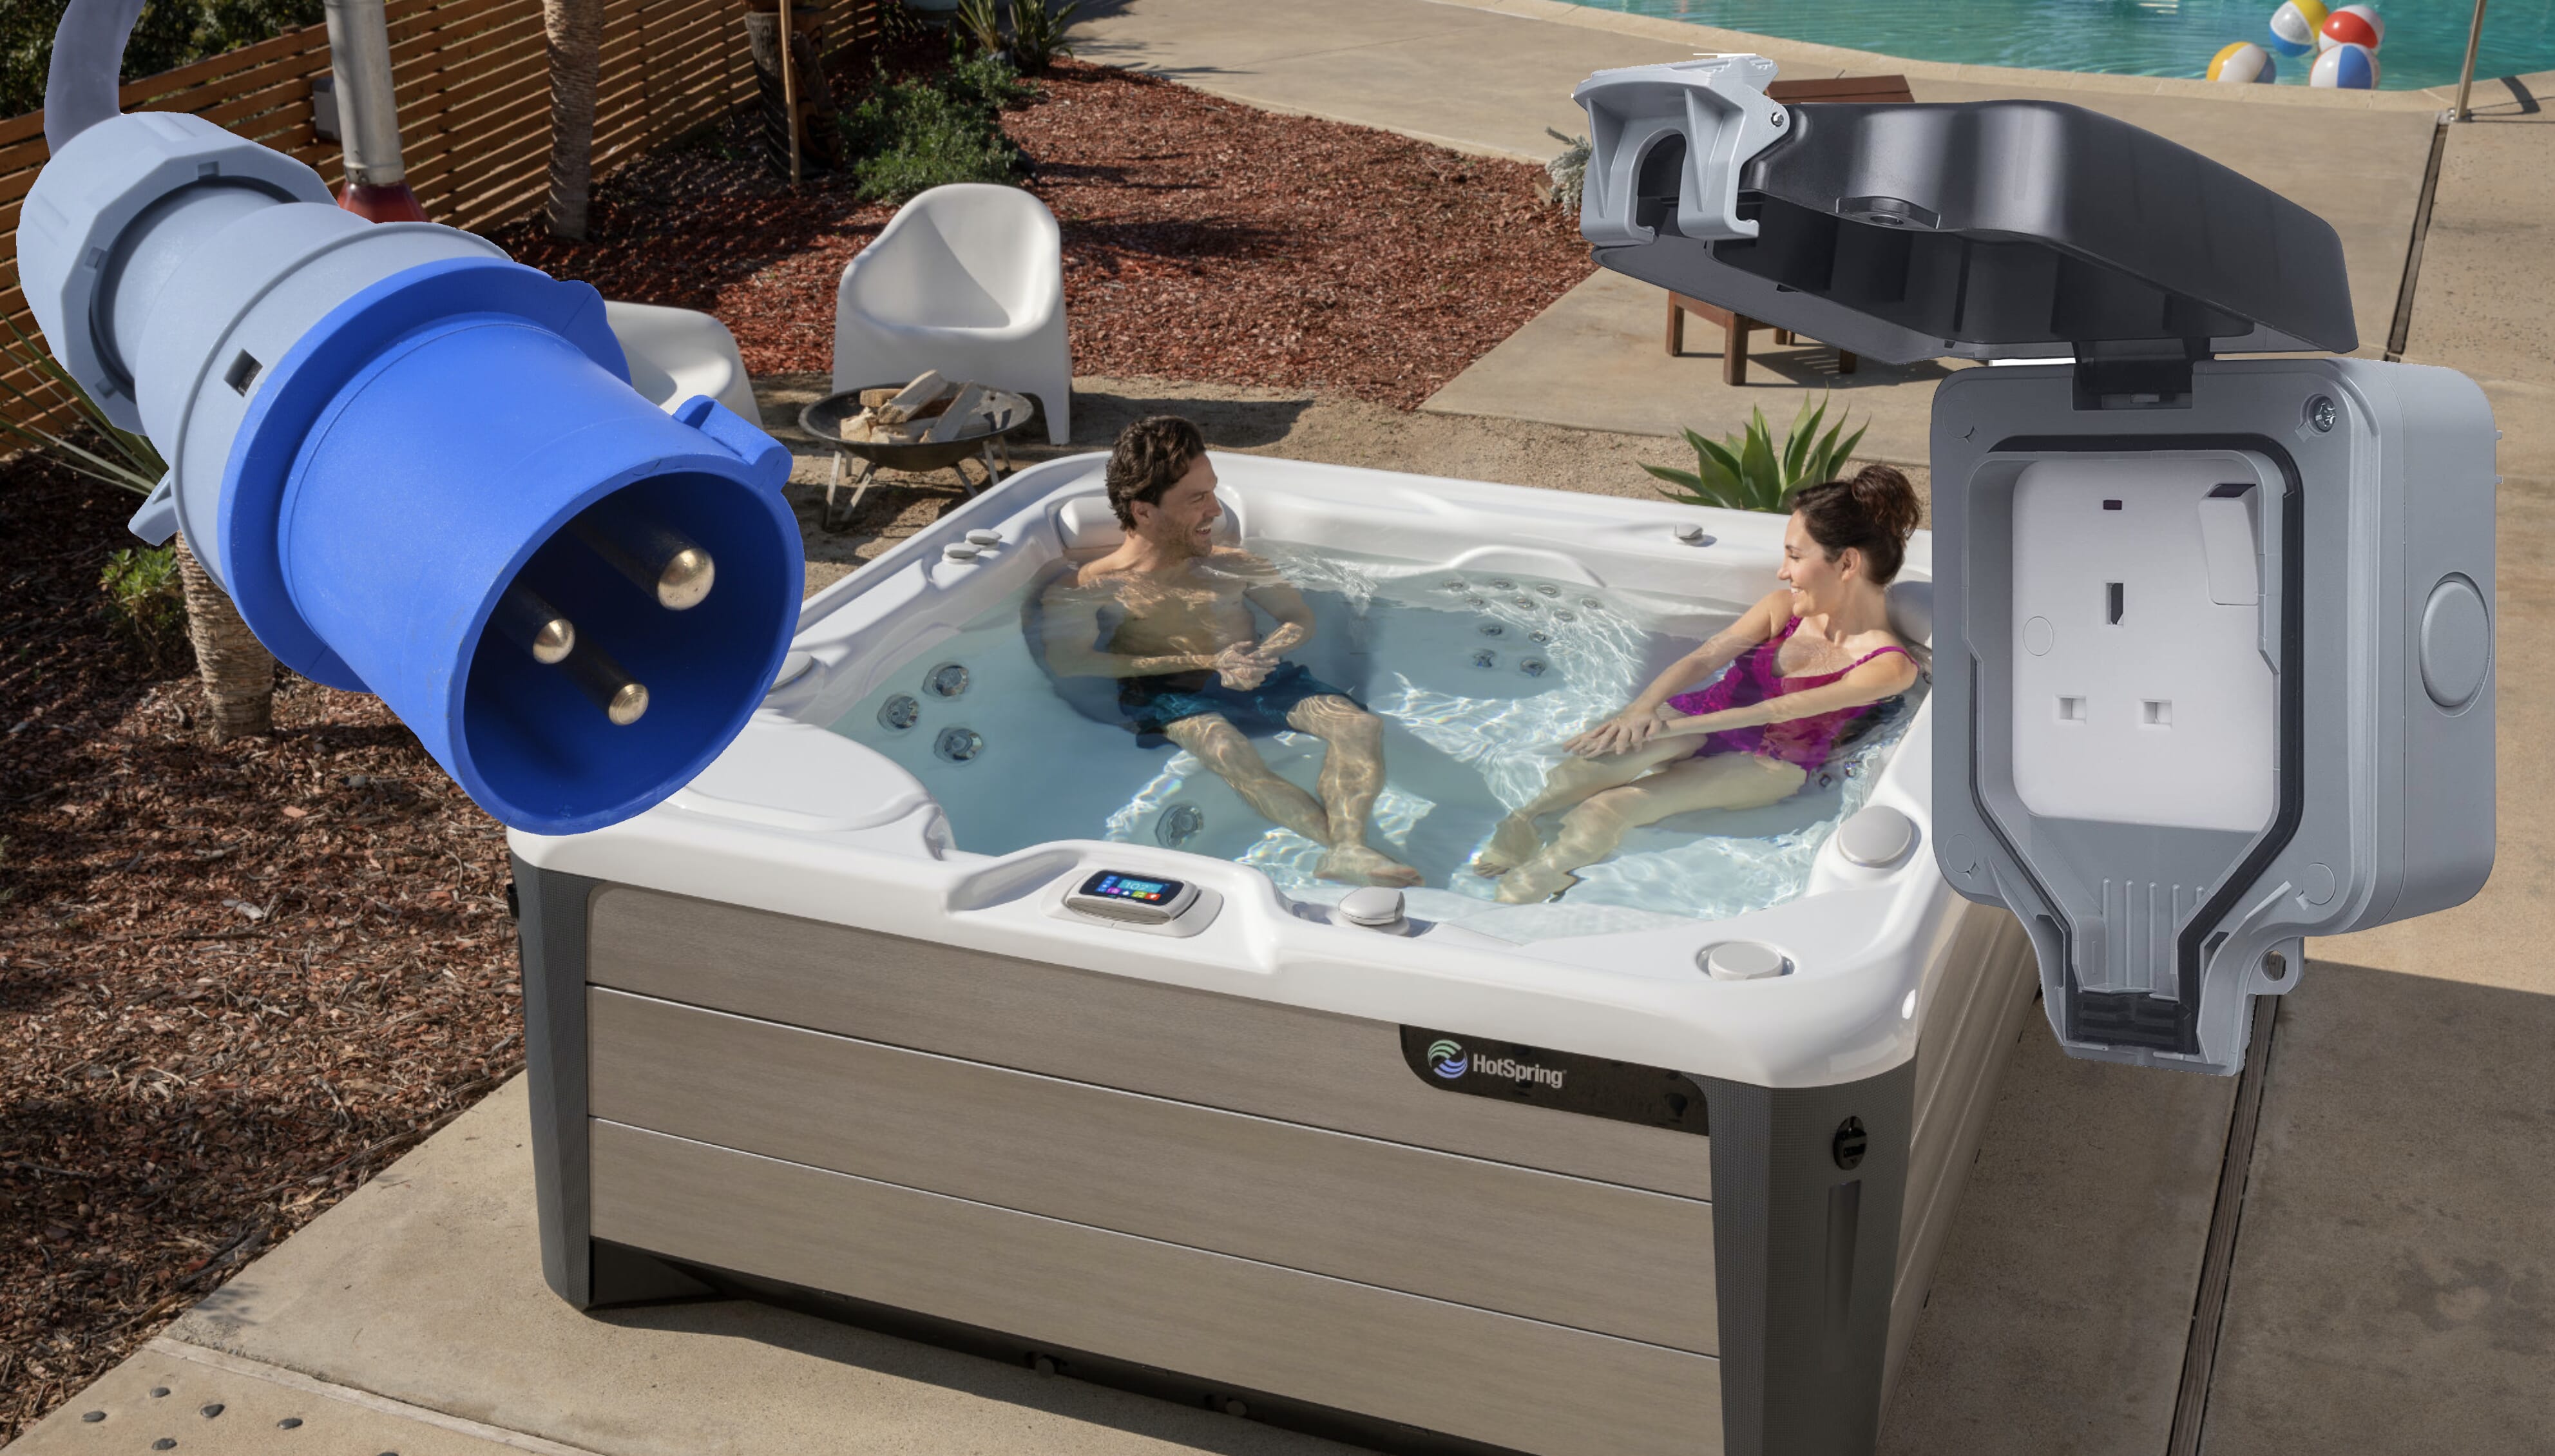 Can I plug my hot tub into a regular outlet